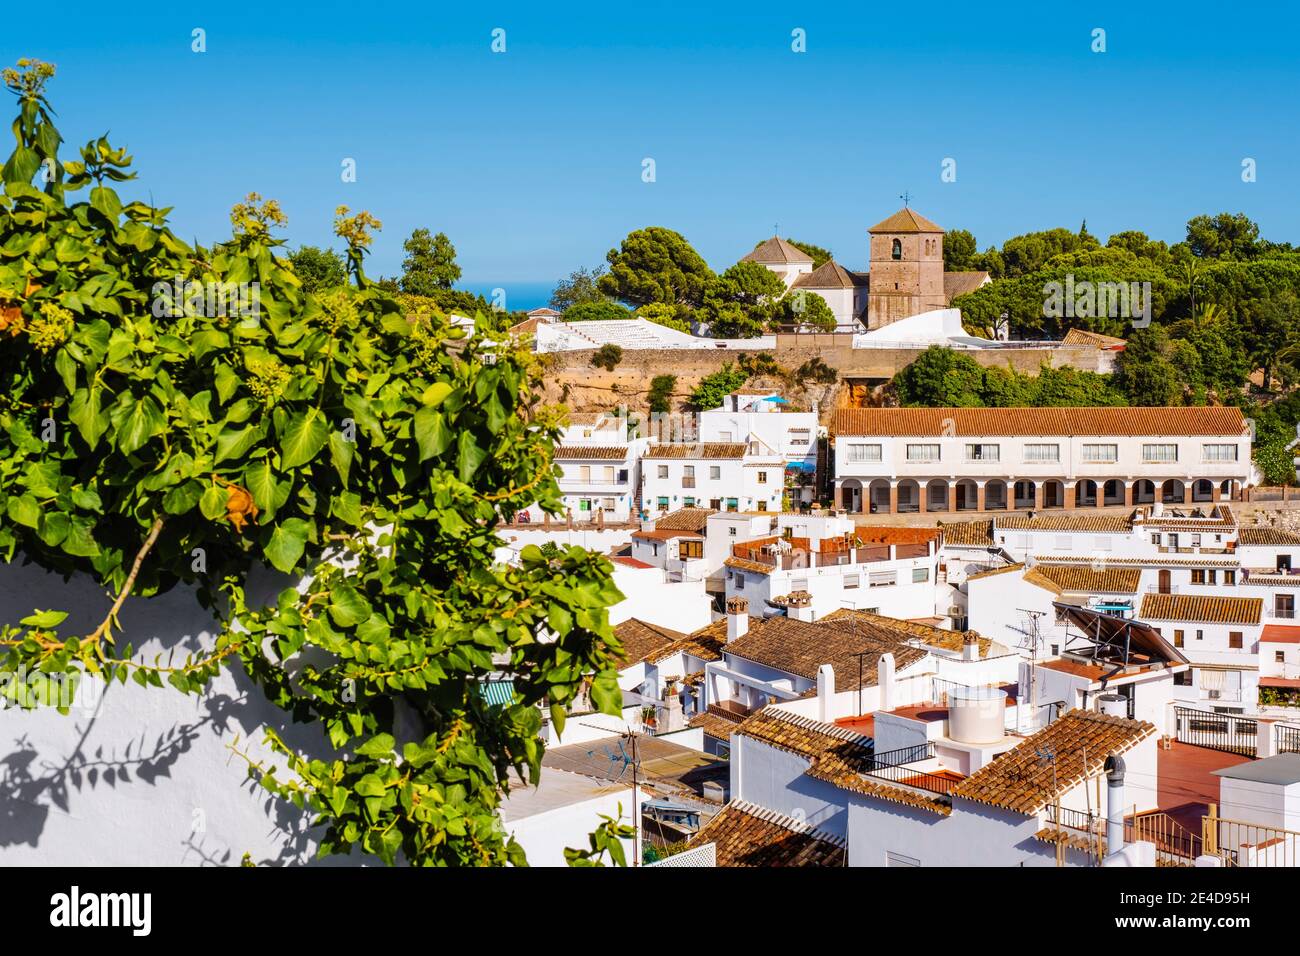 Typical white village of Mijas. Costa del Sol, Malaga province. Andalusia, southern Spain Europe Stock Photo